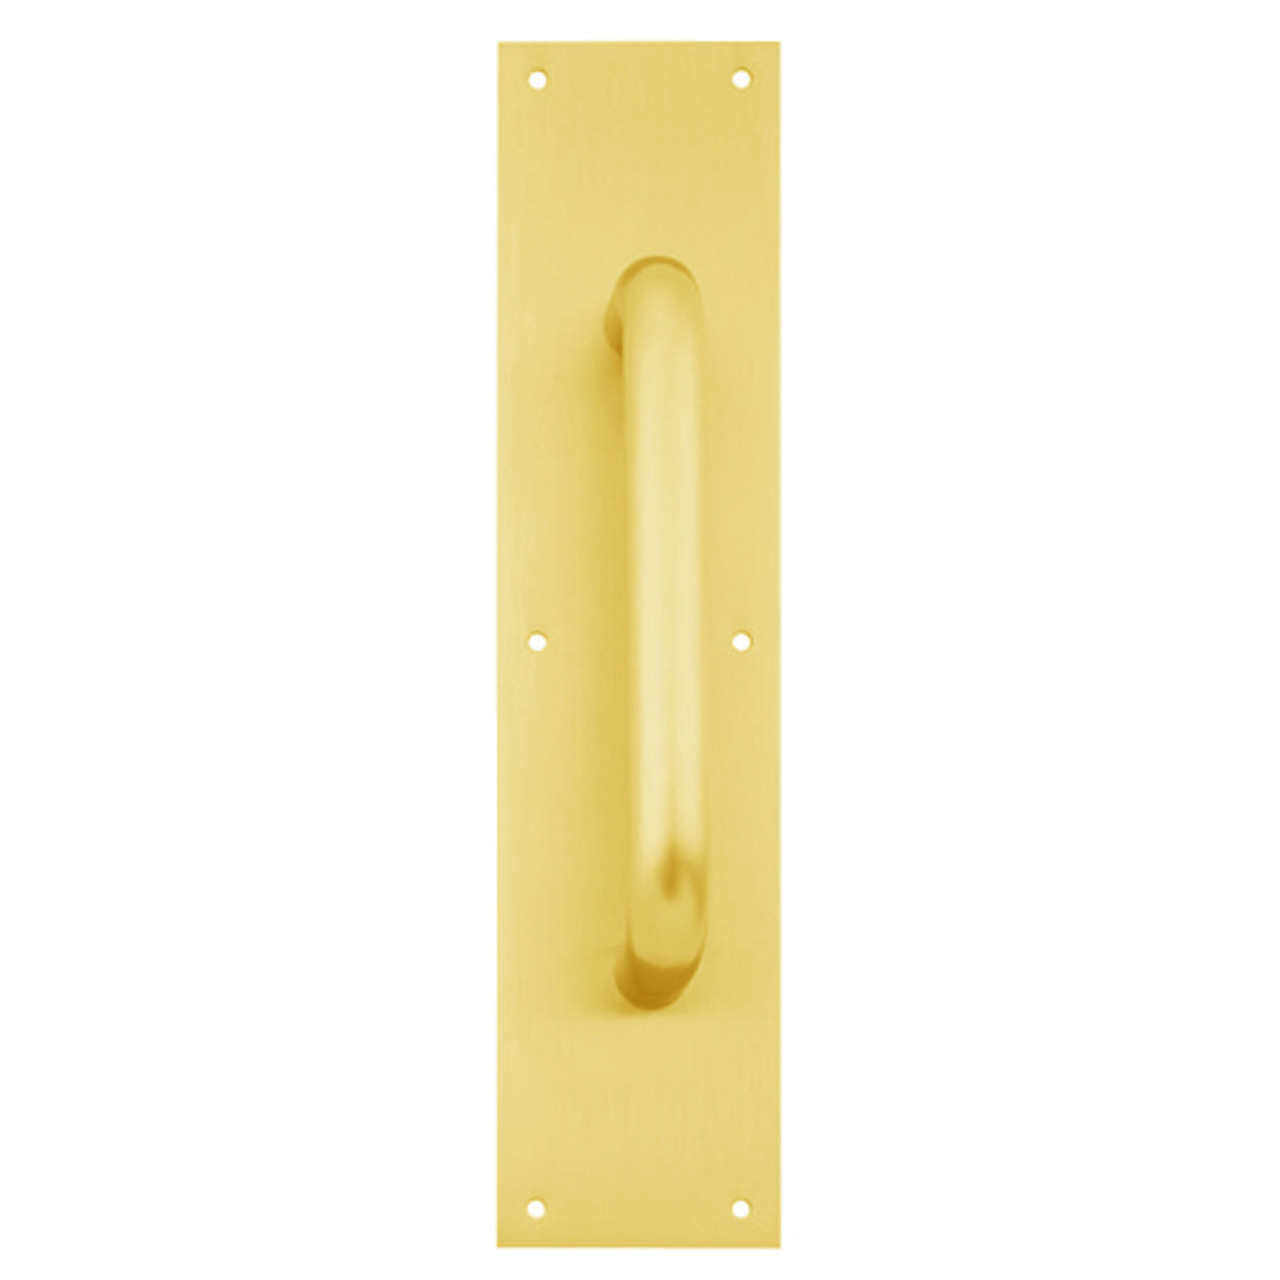 8303-8-US3-6x16 IVES Architectural Door Trim 6x16 Inch Pull Plate in Bright Brass